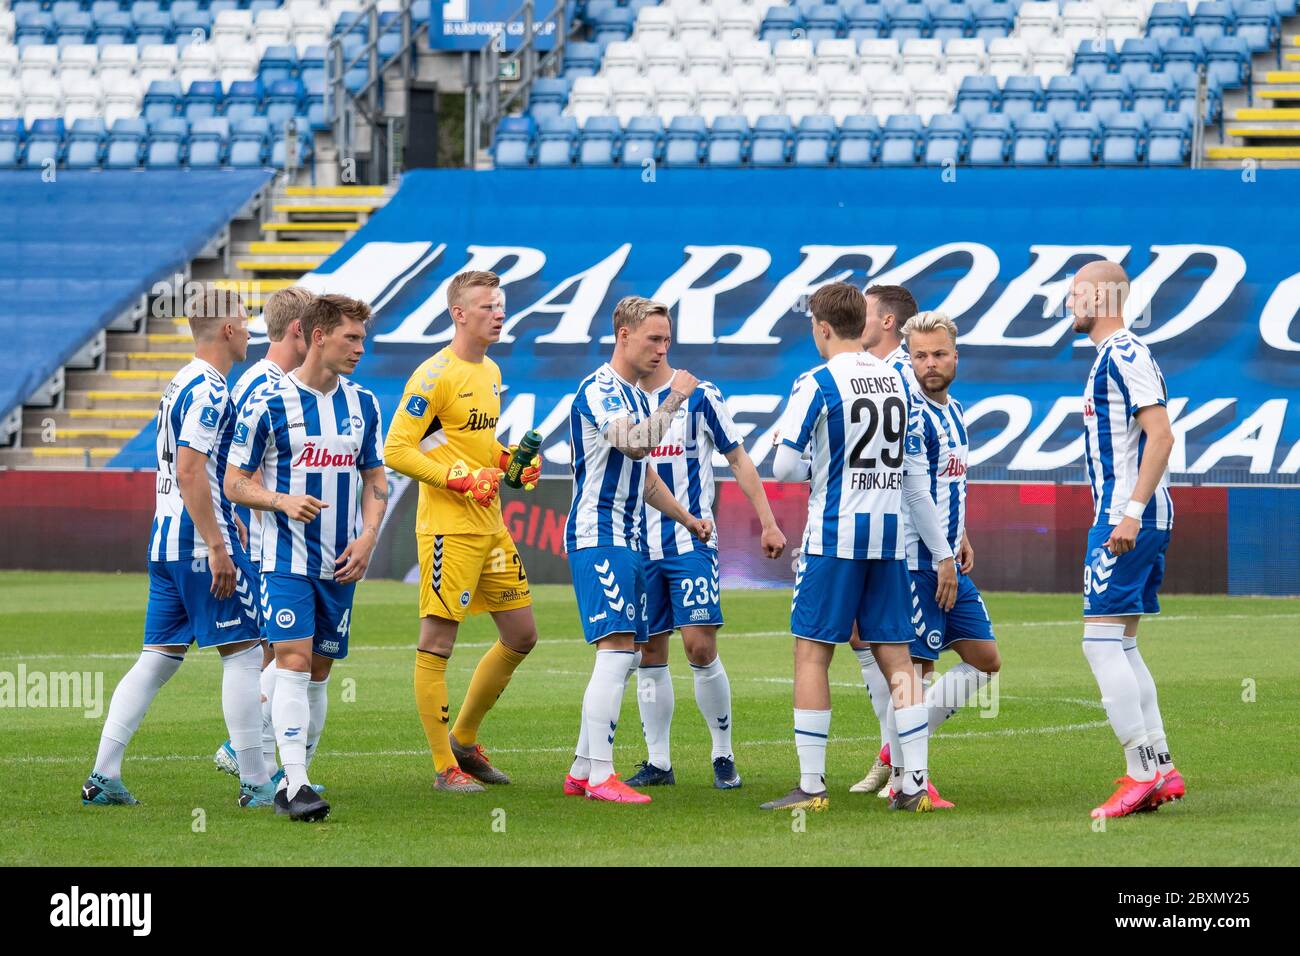 Odense, Denmark. 07th June, 2020. The players of OB are preparing for the  3F Superliga match